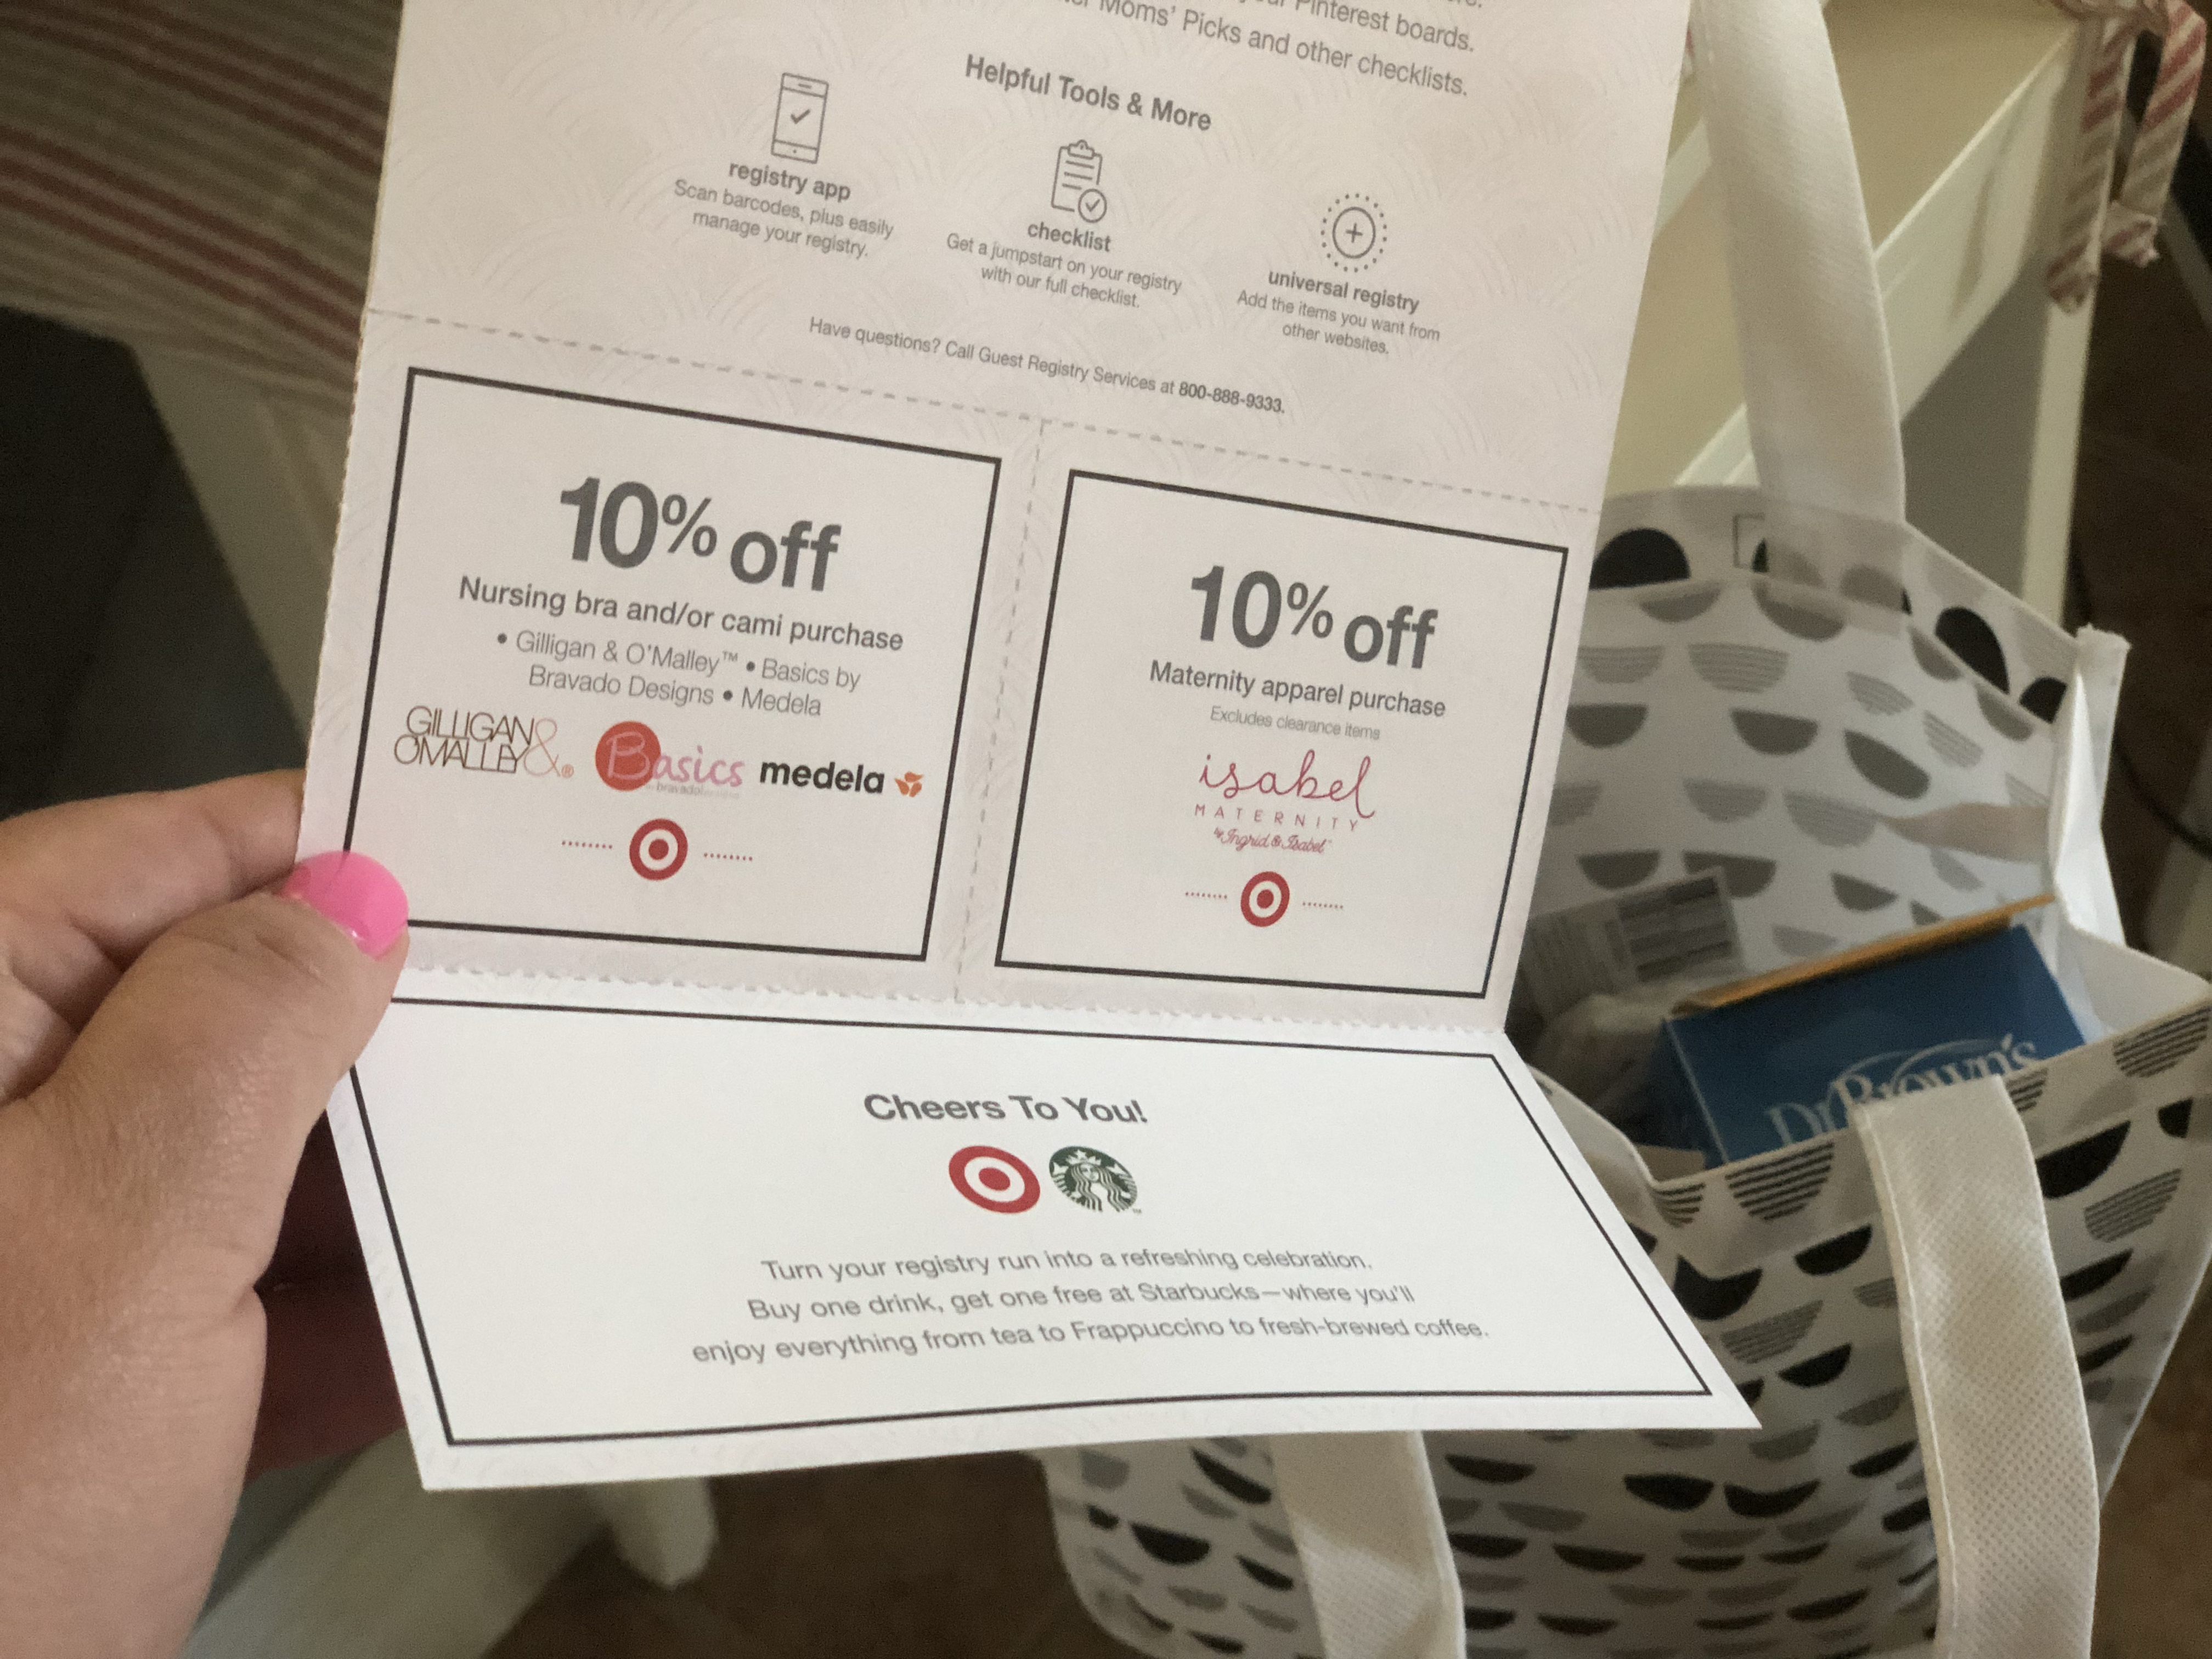 target baby registry bag with free gift coupons and samples - includes coupons